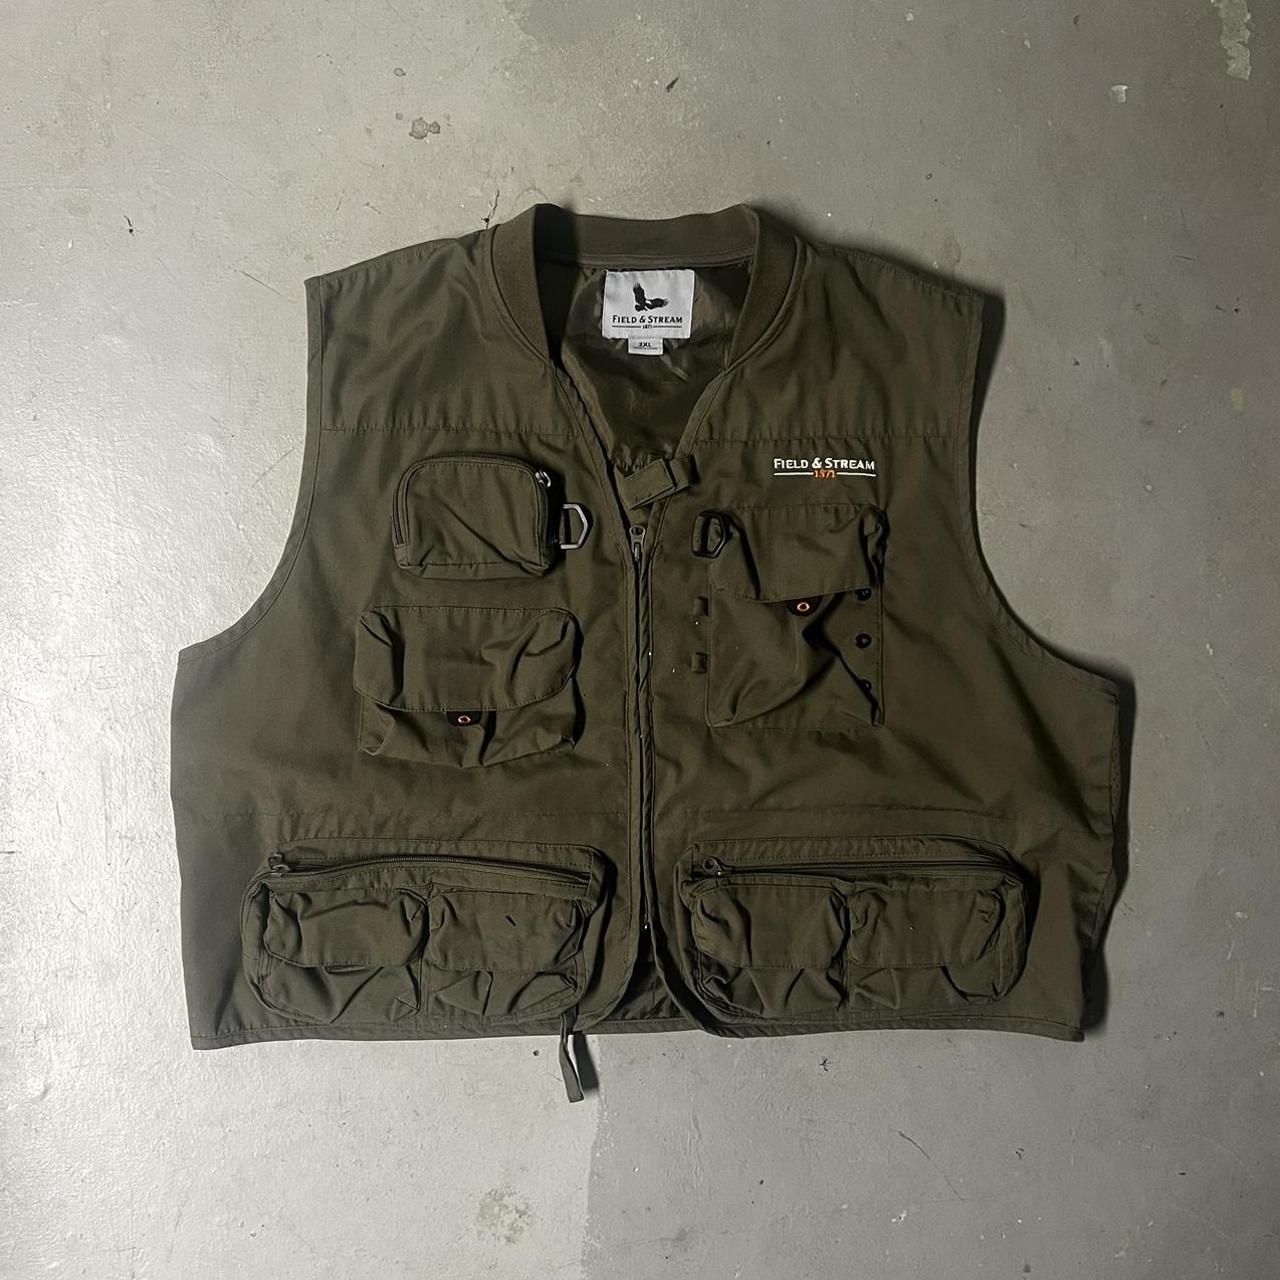 Field and Stream Fishing Vest Size 2XL, Good